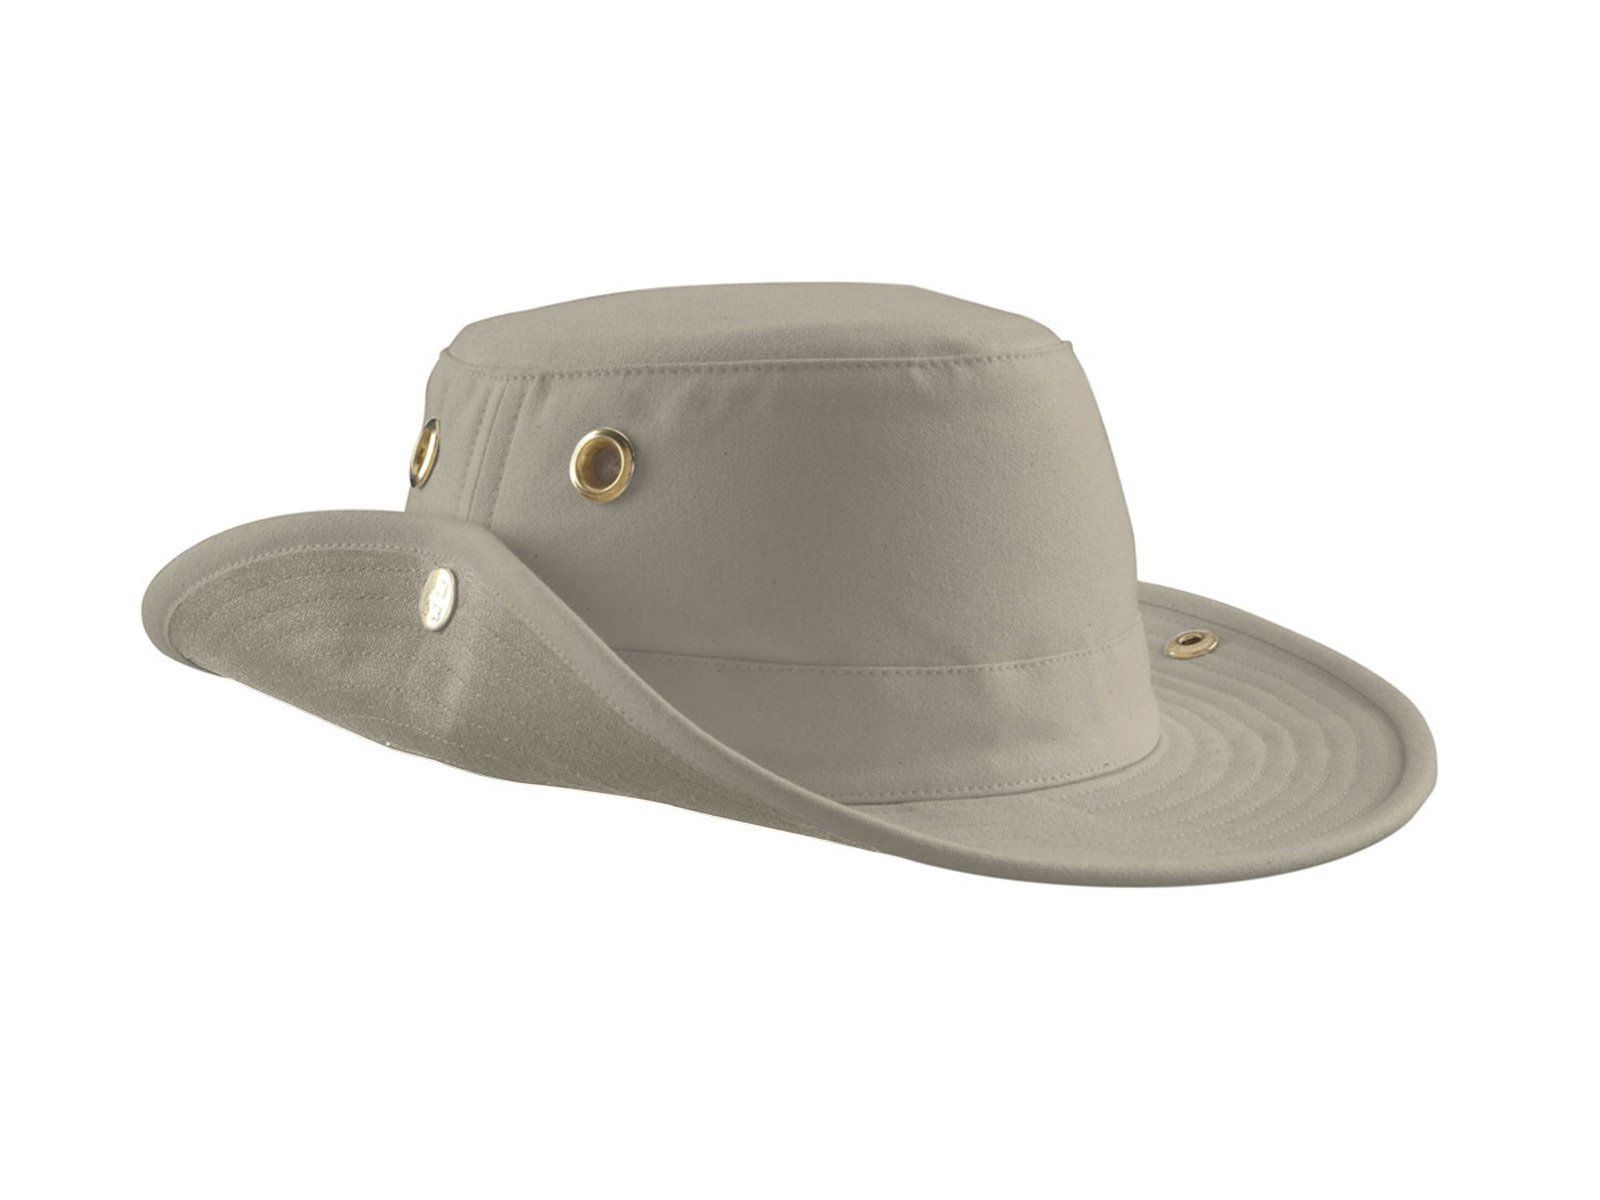 Tilley Iconic T1 Bucket Hat - Natural - 7 5/8